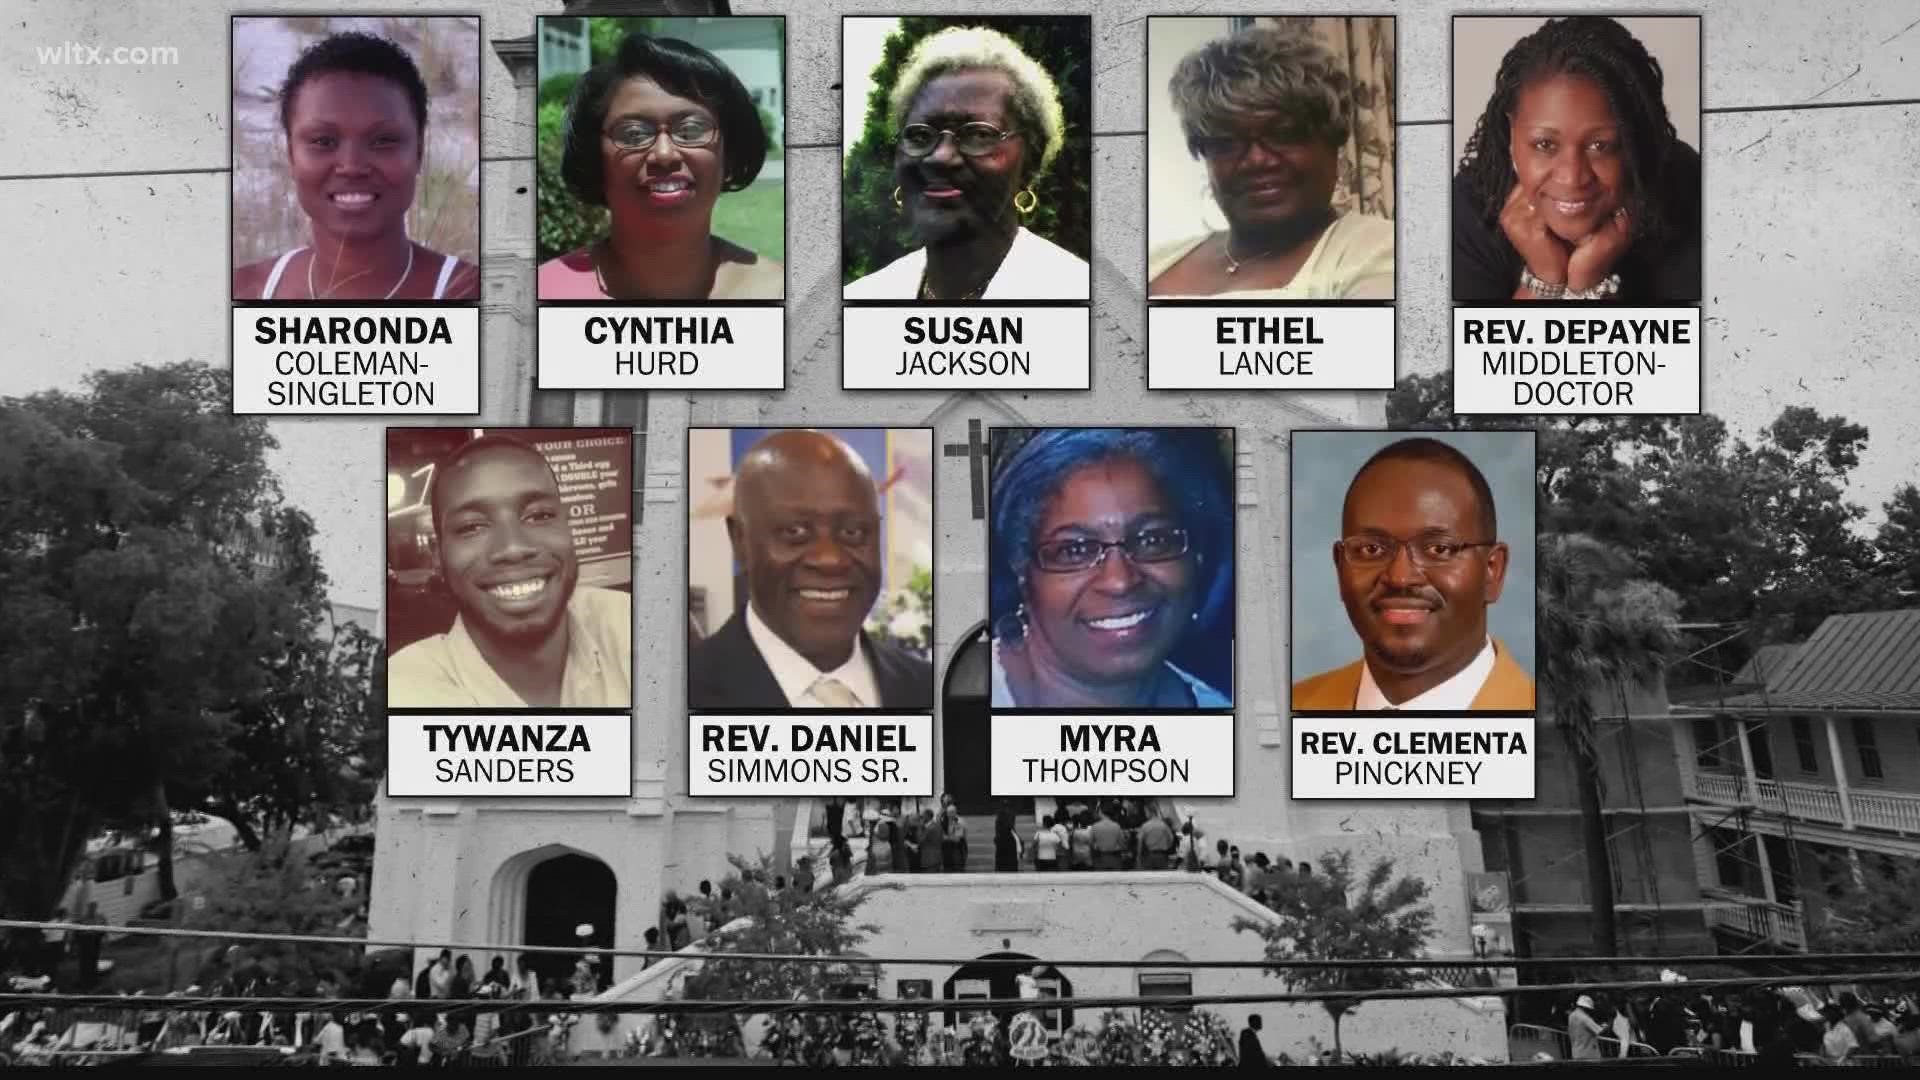 Mother Emanuel African Methodist Episcopal Church in Charleston held a memorial Bible study Friday to honor those killed at the church in 2015.